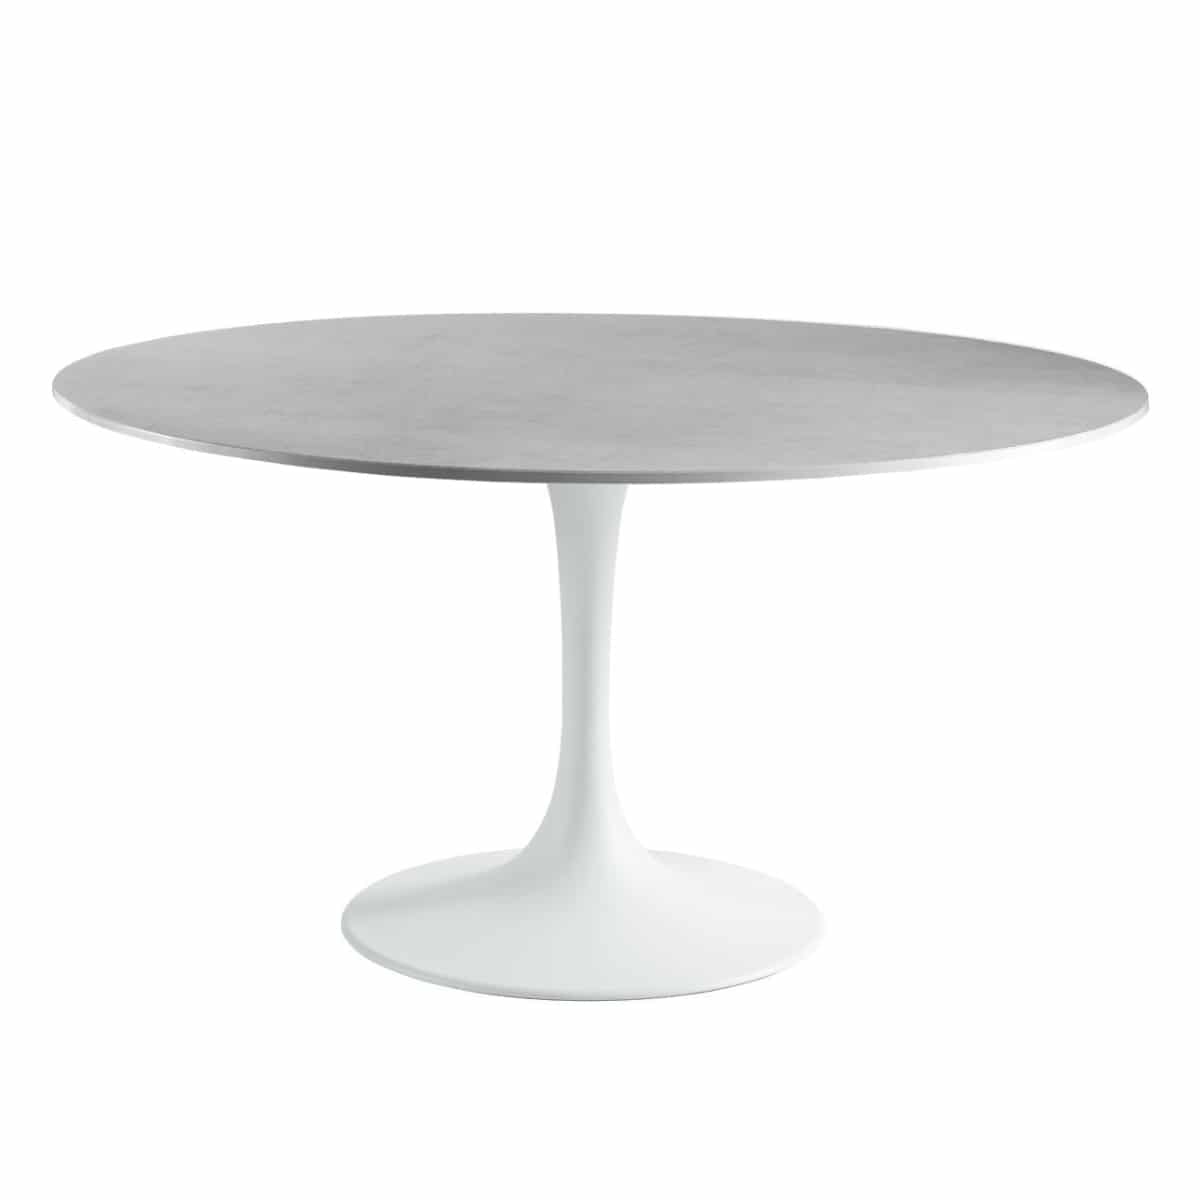 Sifas Korol Dining Table